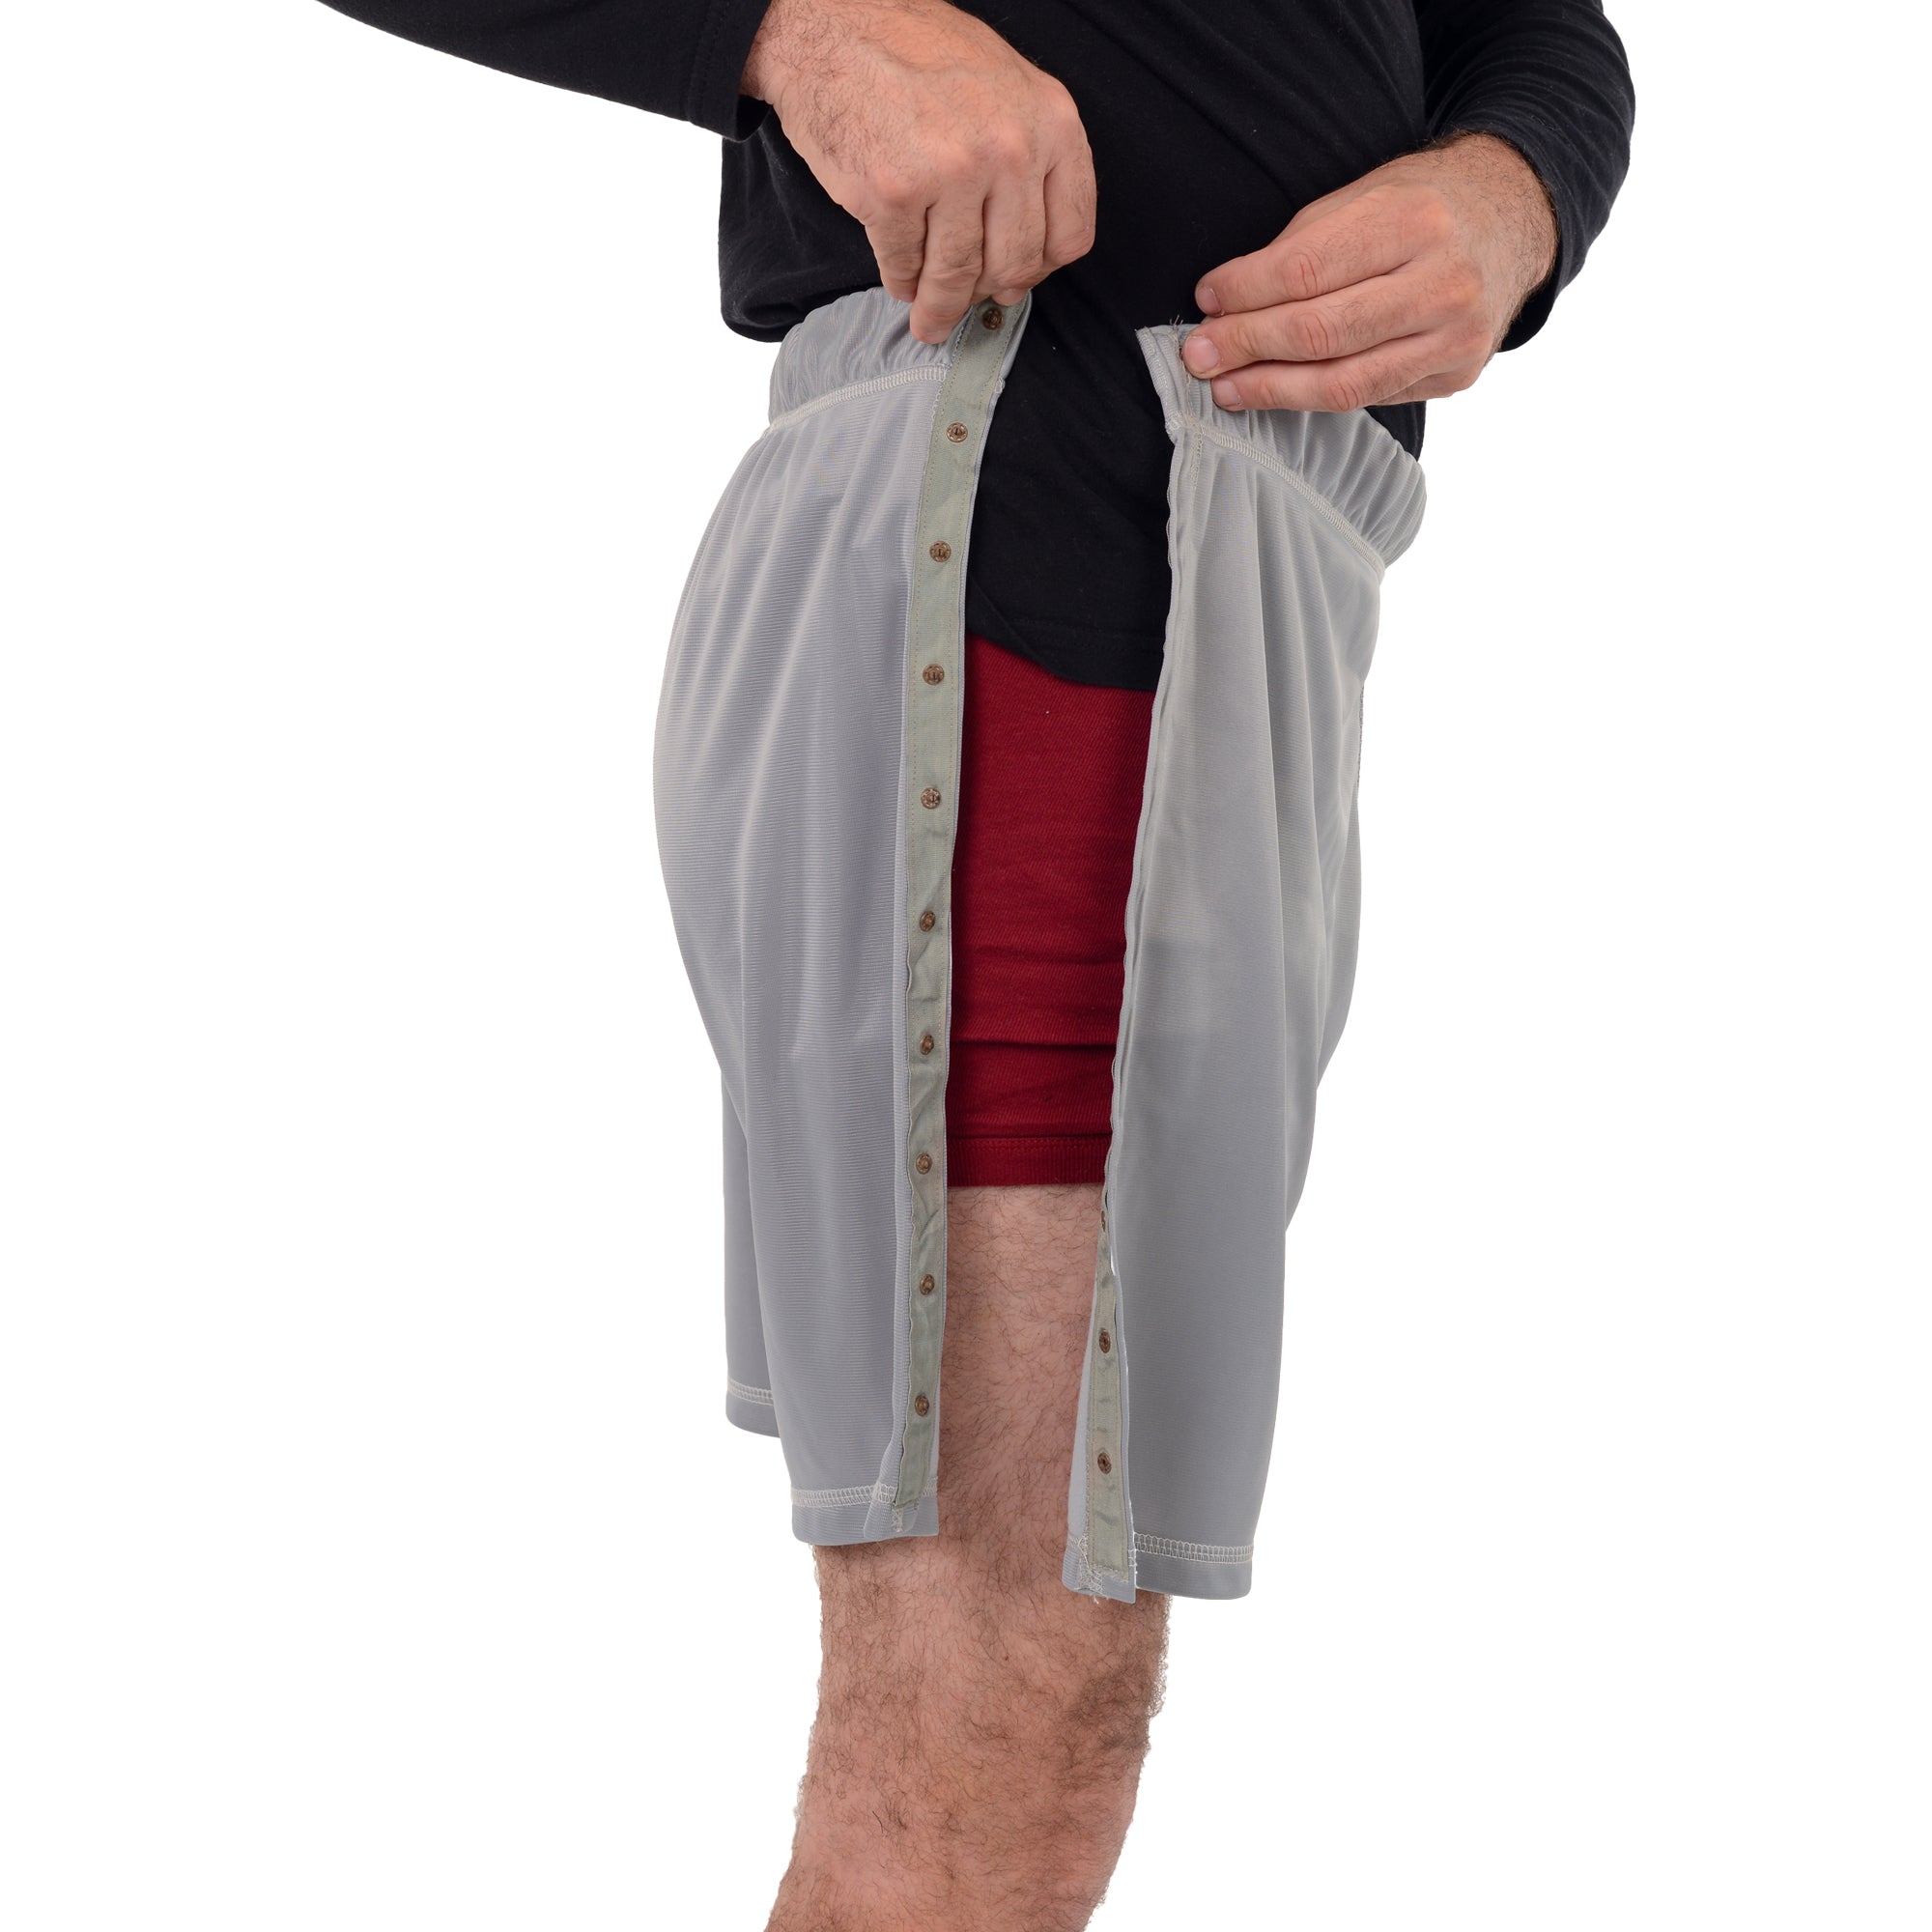 Unisex Post Surgery Tearaway Shorts & Rehab Pants with Snap Closure,  Convenient and Quick